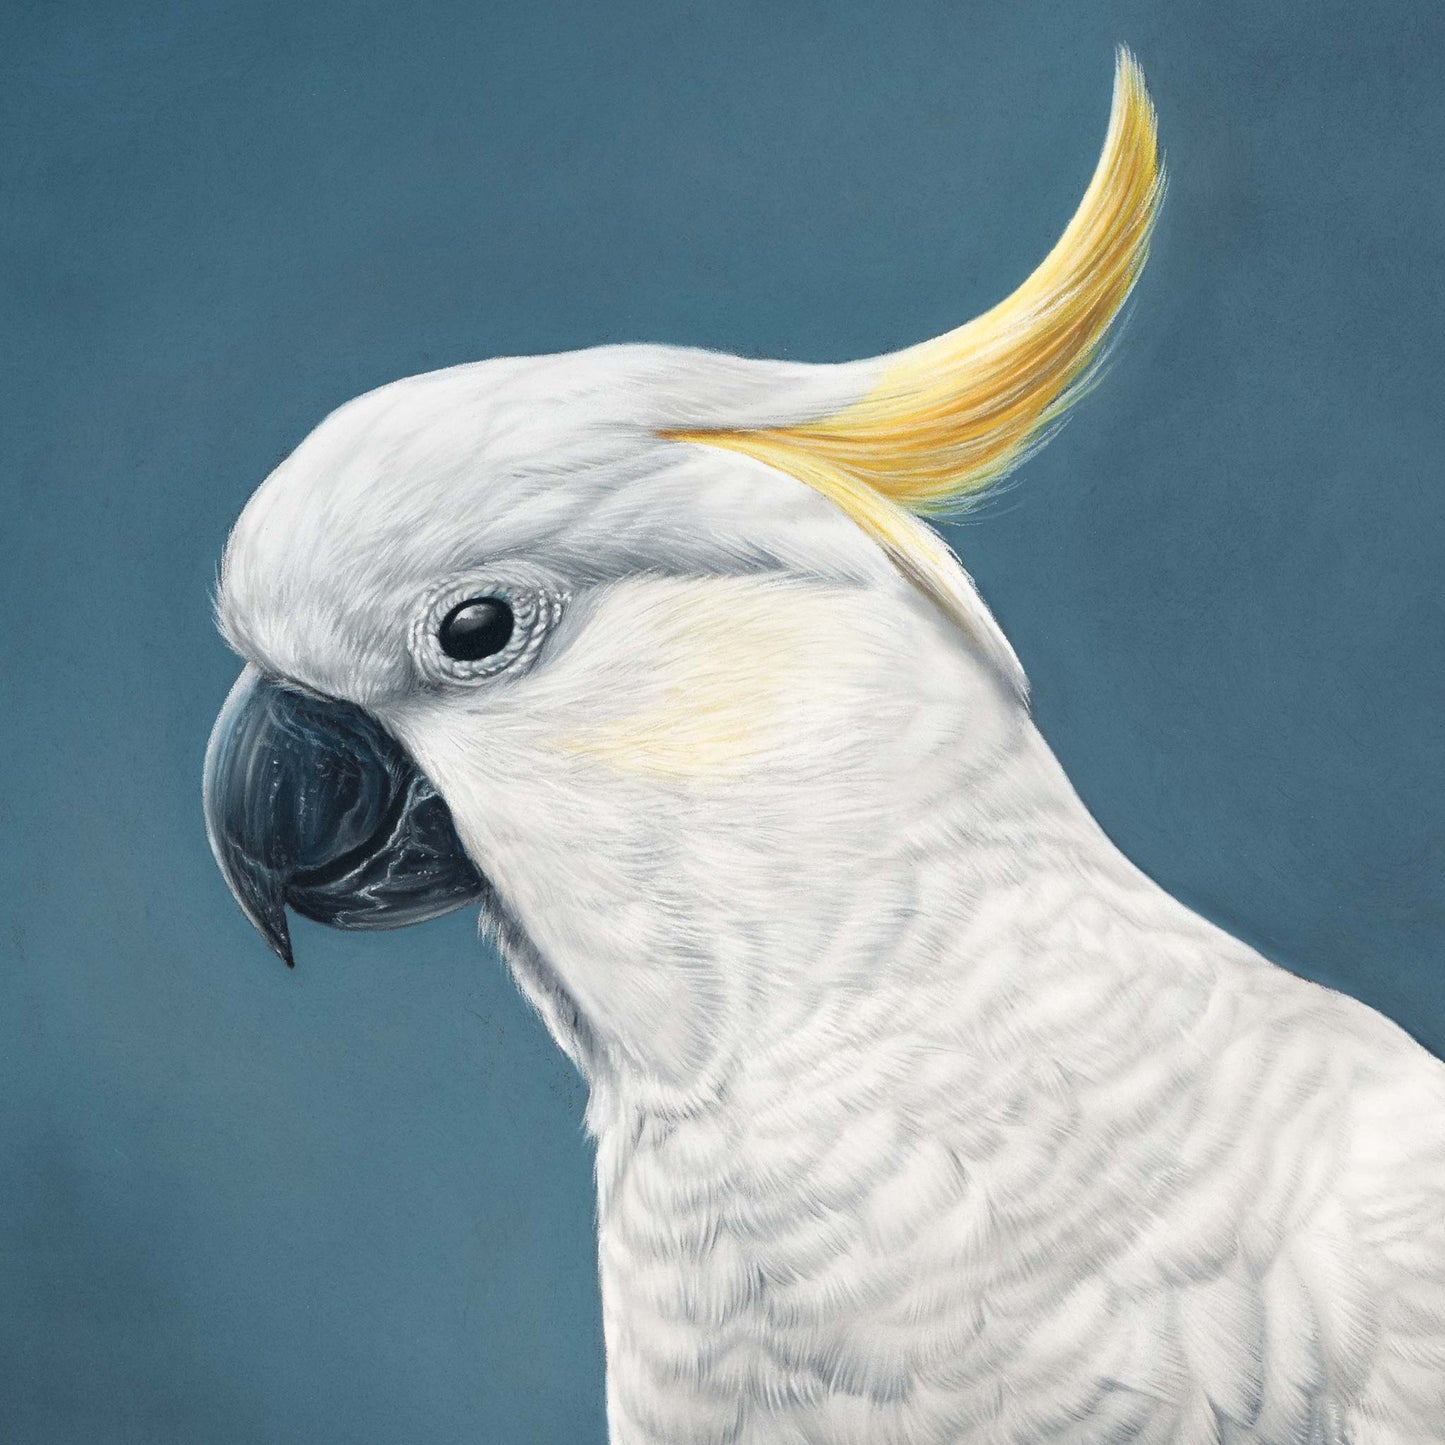 Realism drawing of a white cockatoo face with a blue background